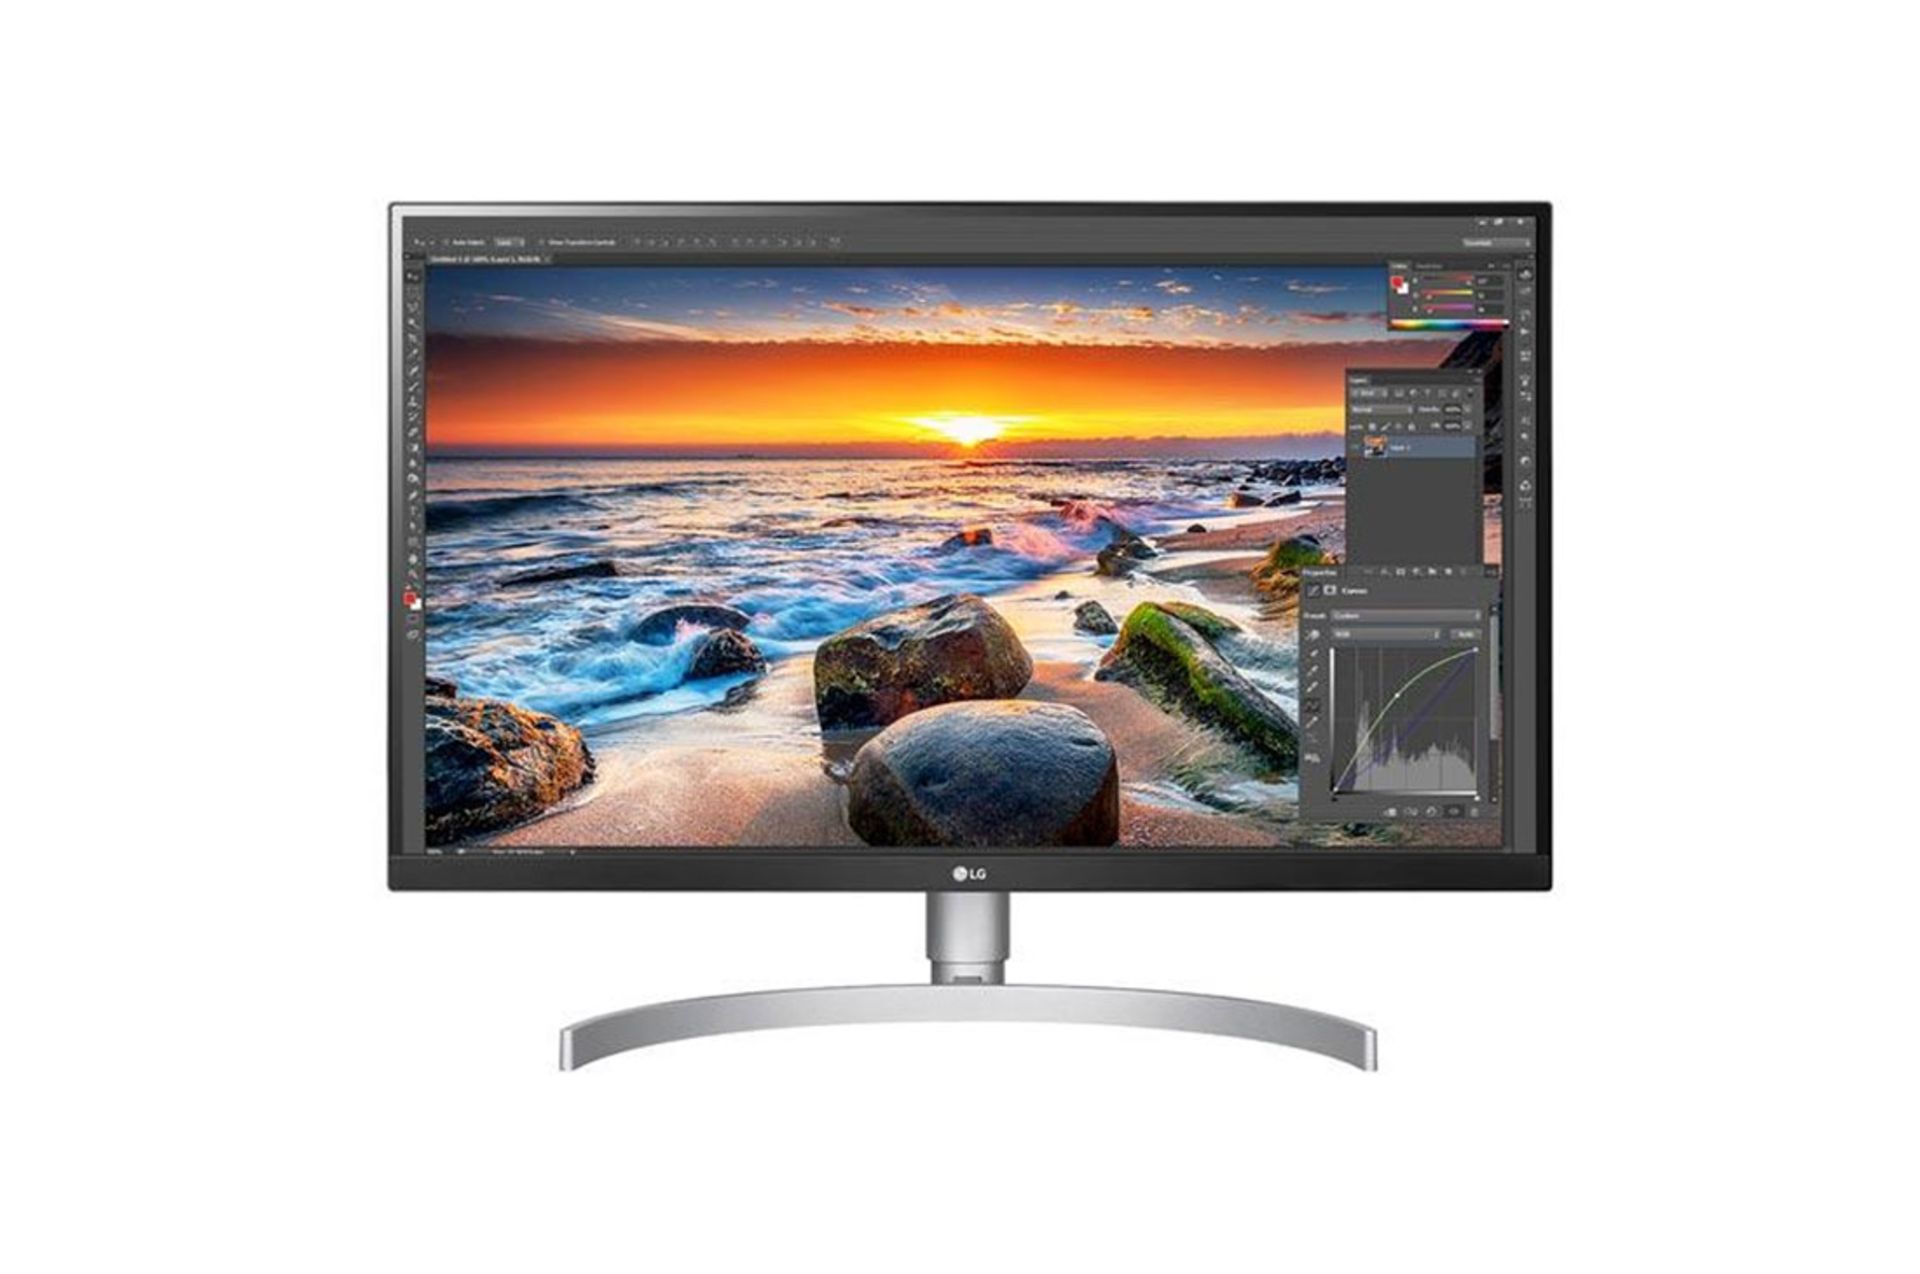 V Grade A LG 27 Inch 4K UHD IPS LED MONITOR WITH HDR 10 - HDMI X 2, DISPLAY PORT X 1, USB TYPE C,